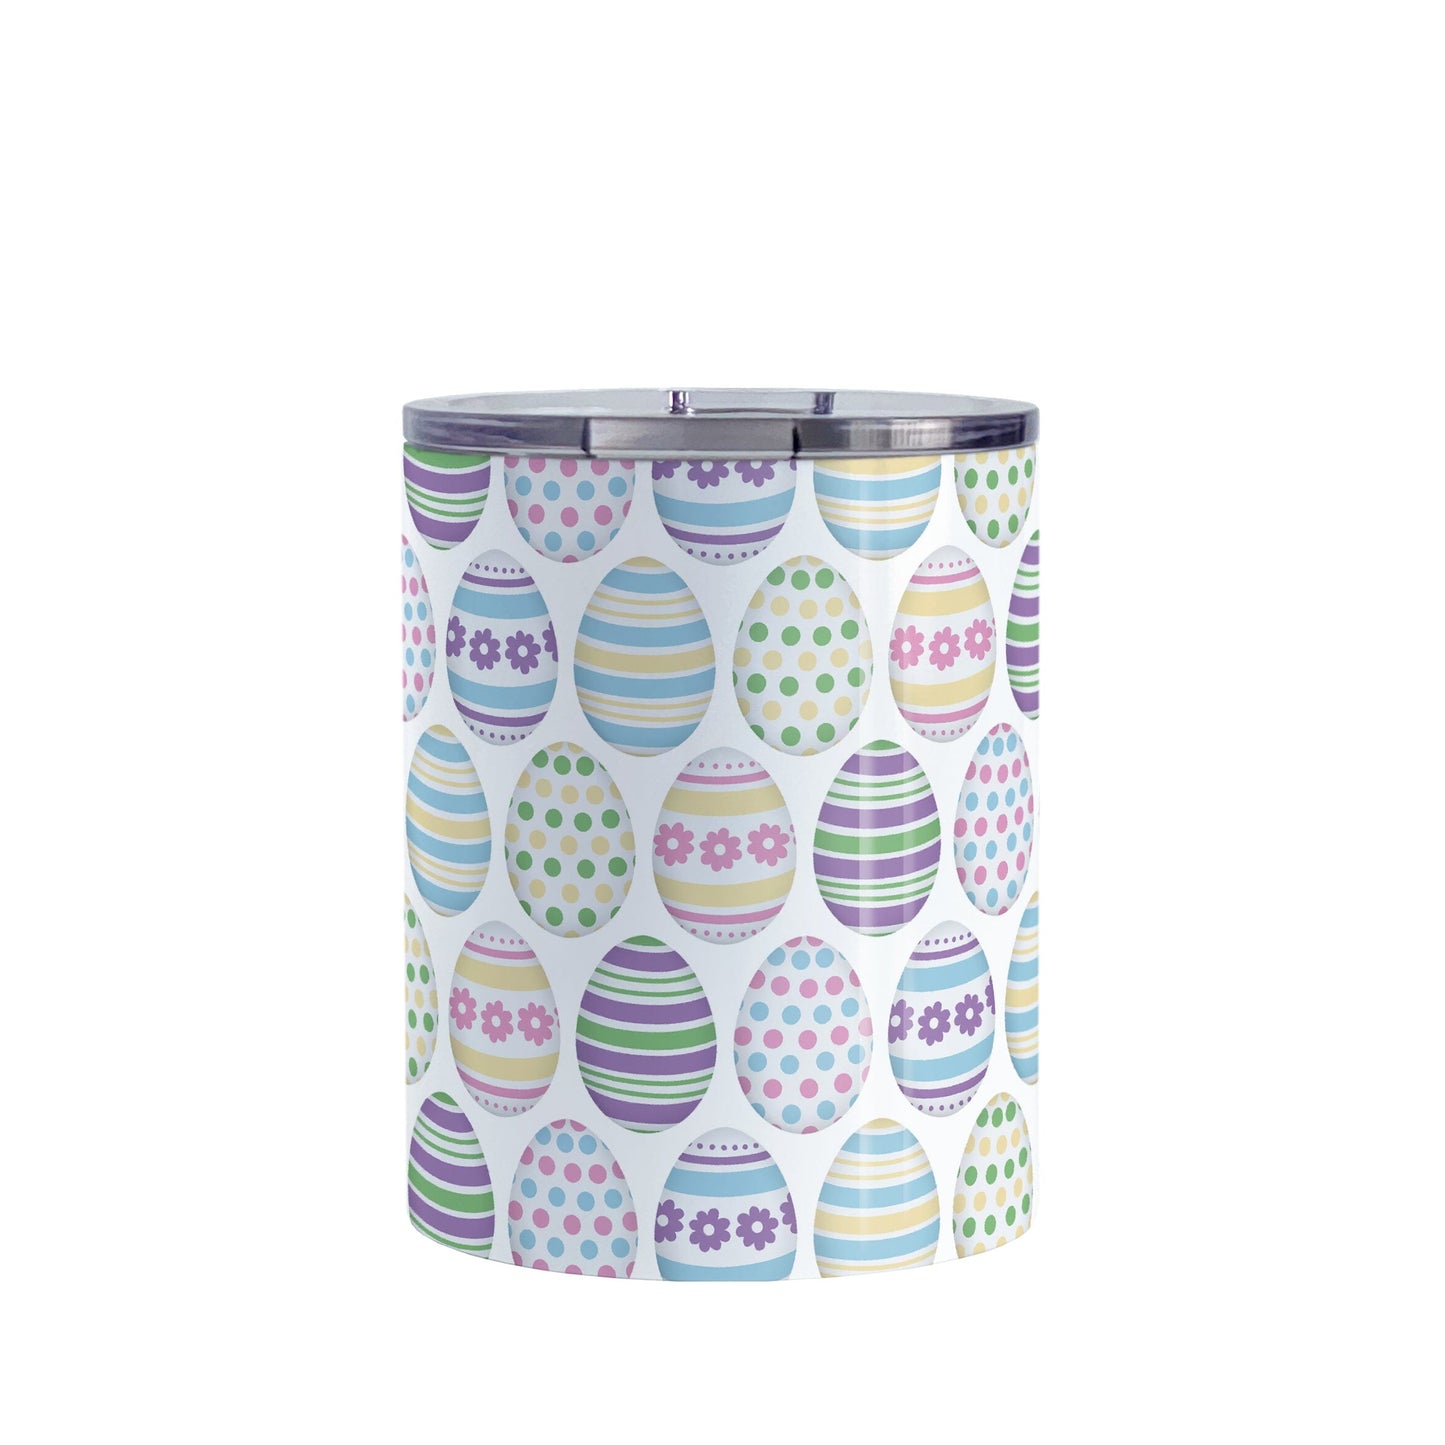 Easter Eggs Tumbler Cup (10oz) at Amy's Coffee Mugs. A stainless steel tumbler cup designed with a pattern of Easter eggs decorated with stripes, polka dots, and flowers in fun Easter-inspired colors.